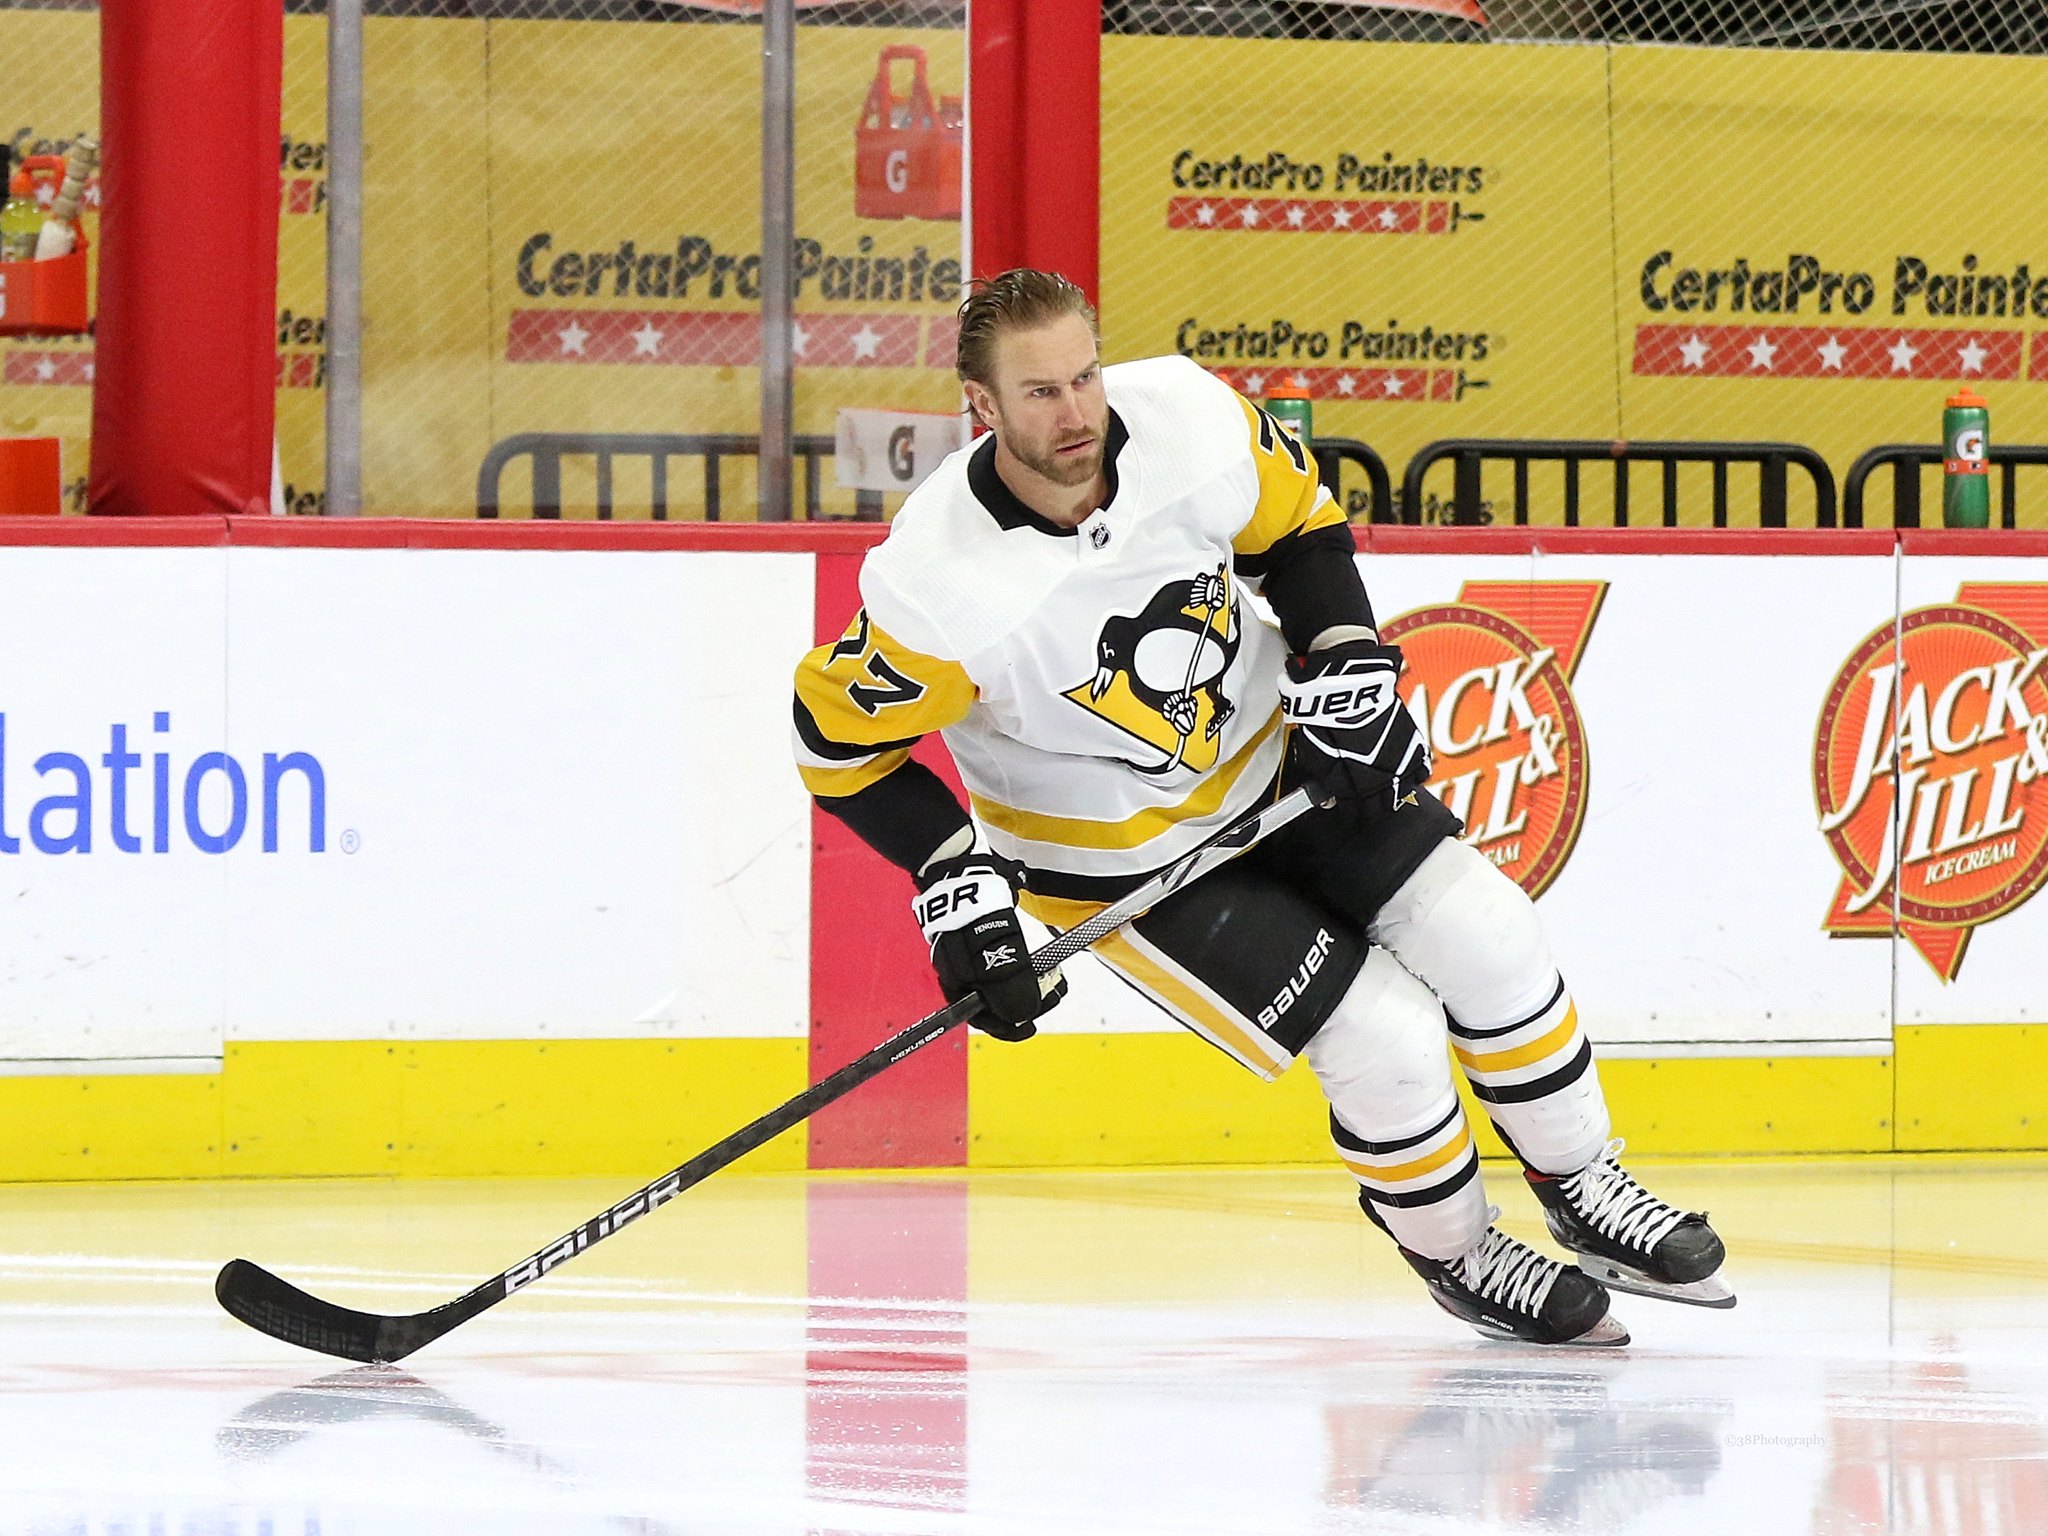 Reupped: Penguins keeping 'Big' Jeff Carter for two more seasons - PensBurgh